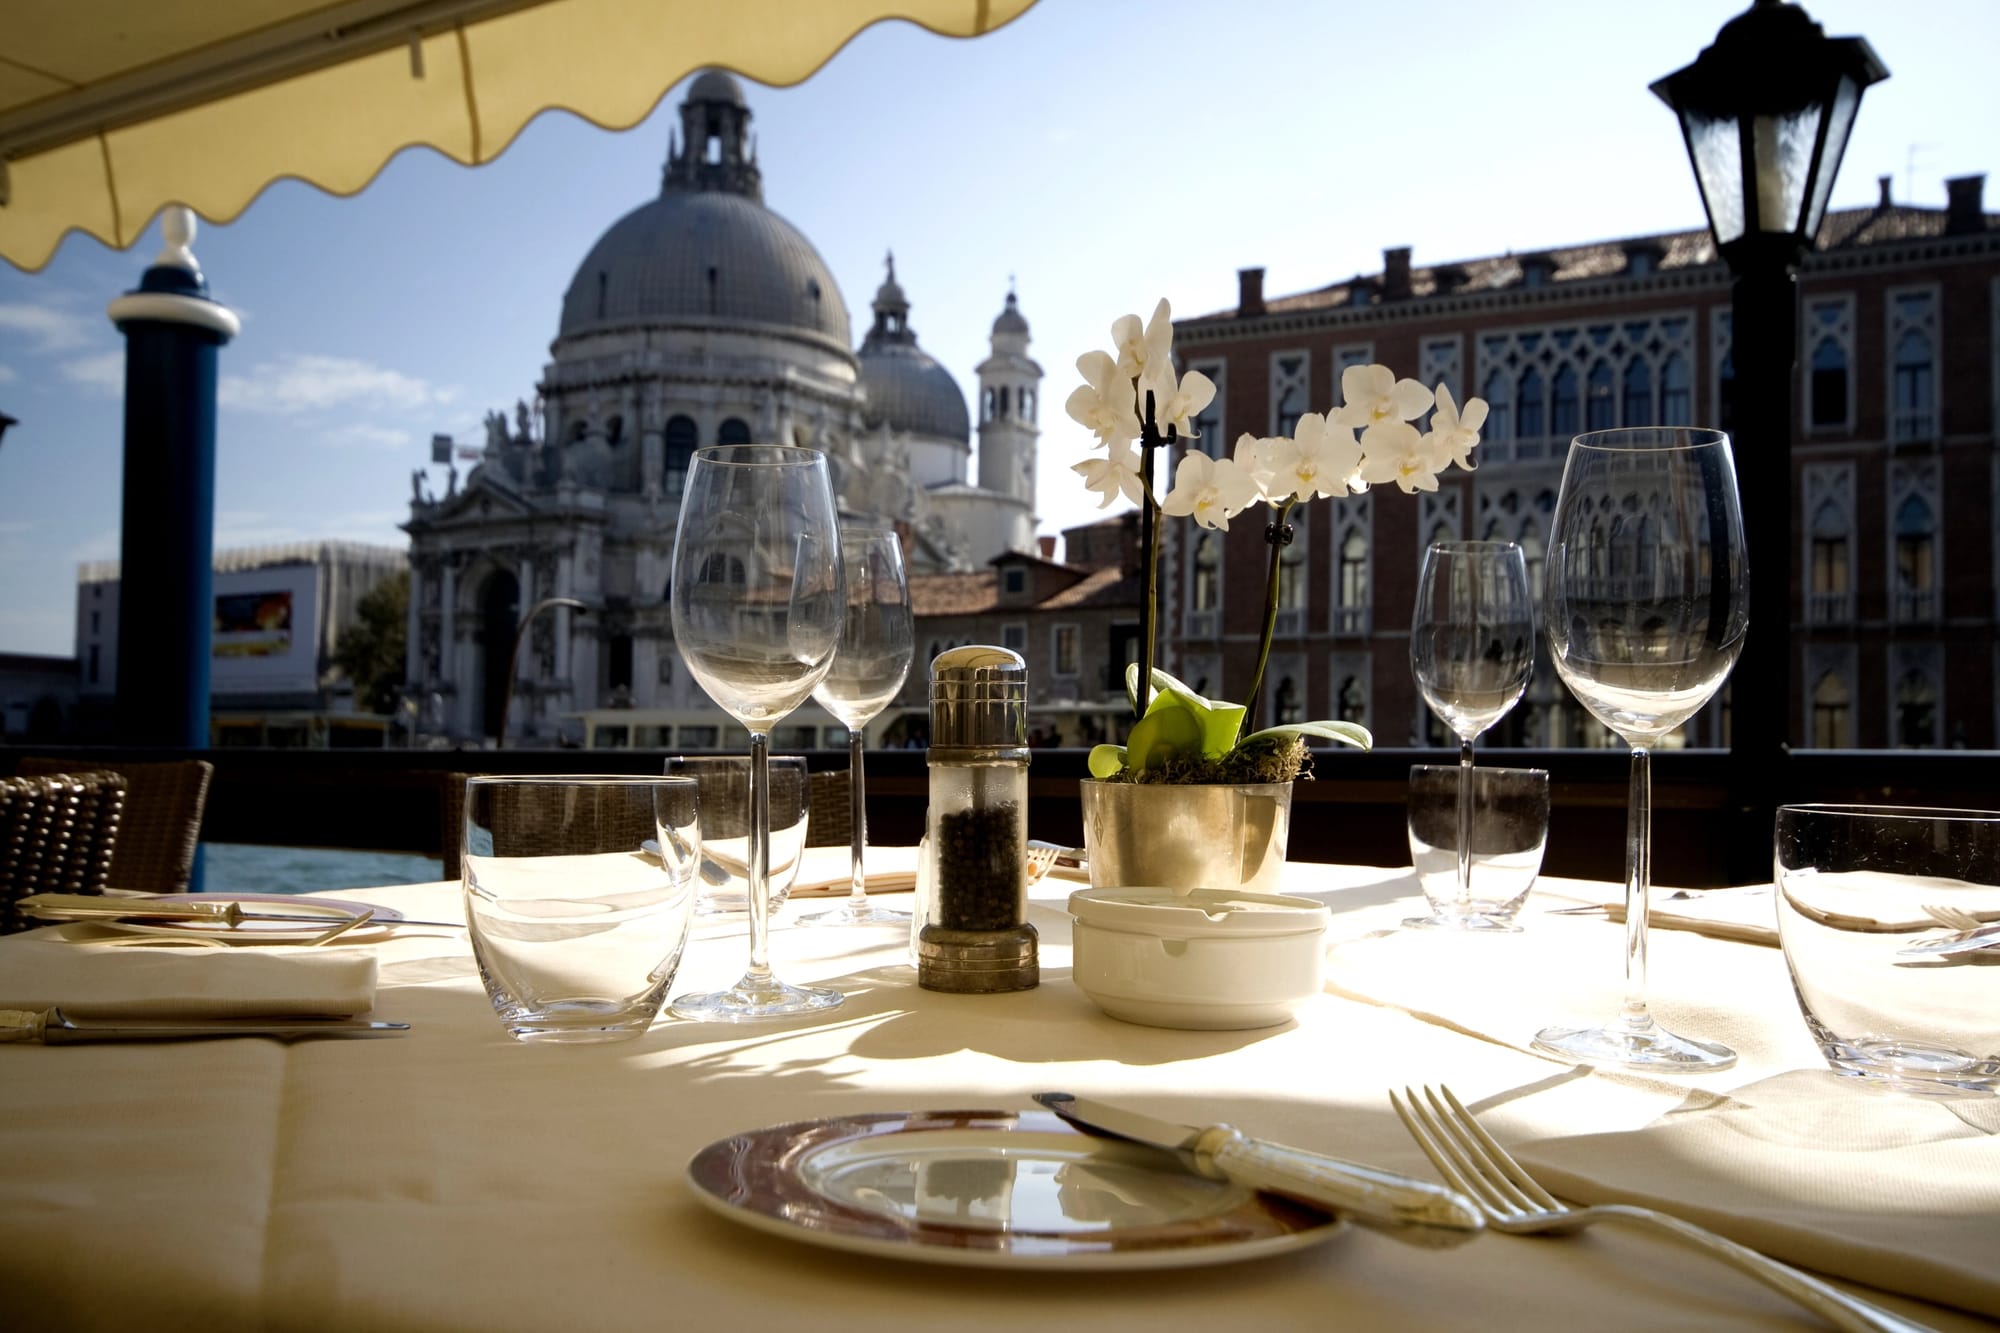 Where To Eat In Venice?